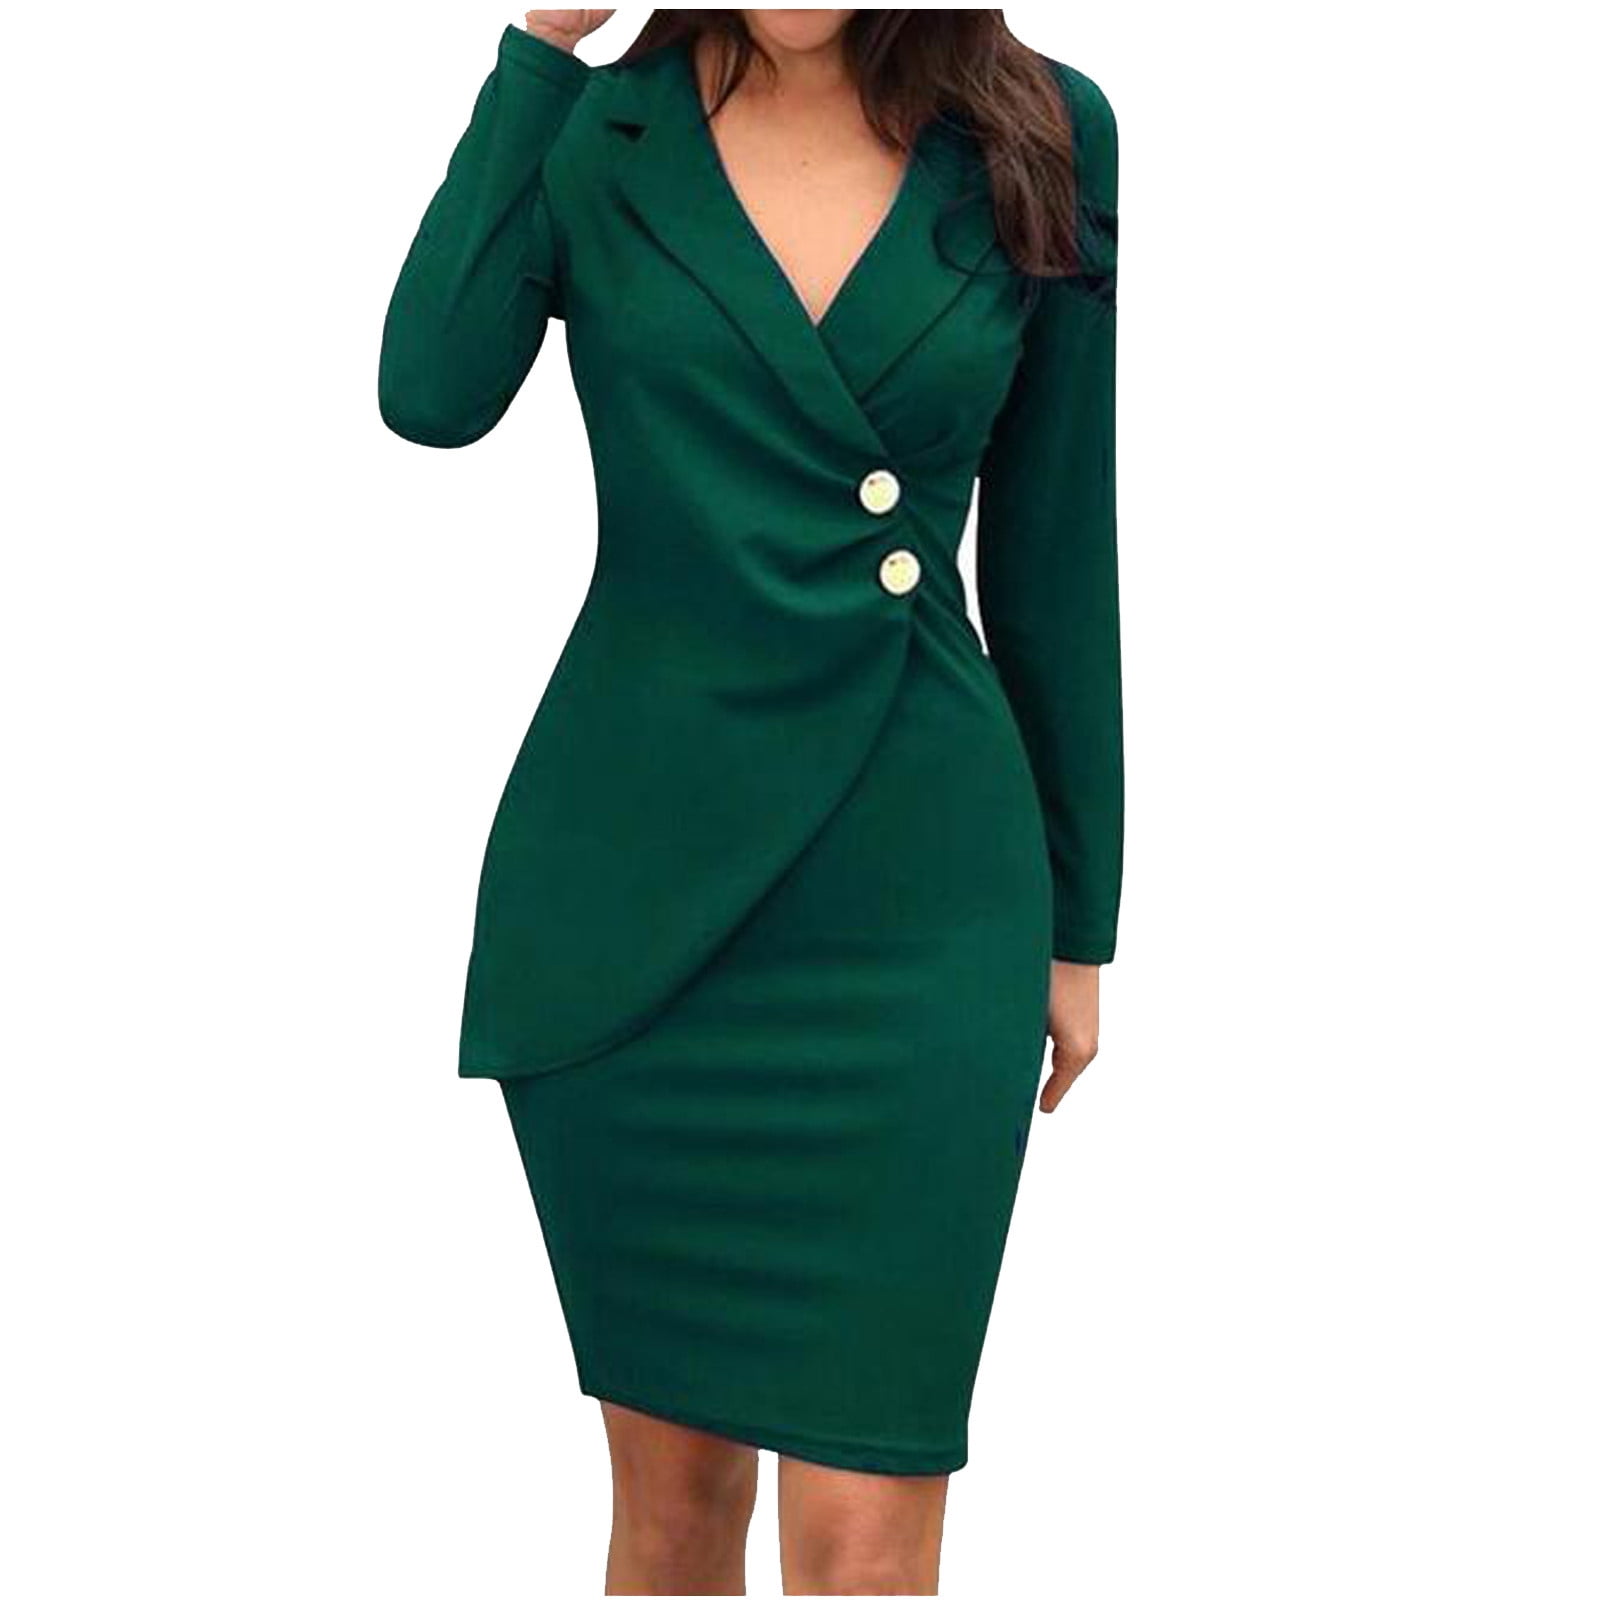 Business Dress Womens Bodycon Off Shoulder Dress Elegant Ladies Long Sleeve V-Neck Belted Retro Cocktail Pencil Dress Wear to Work Office Daily Casual Mini Dress 